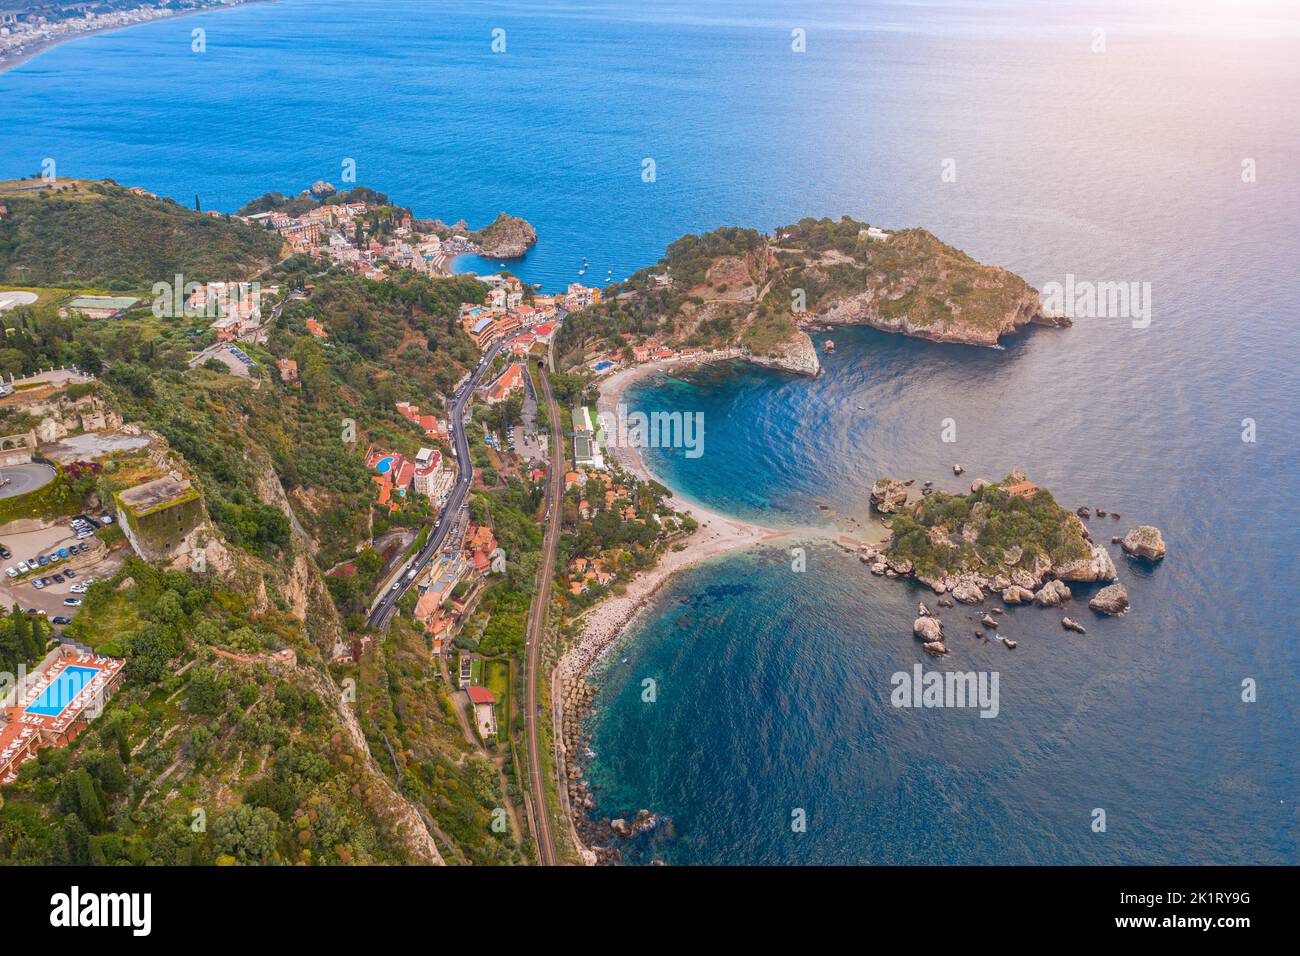 Aerial view of small provincial town seaside town and beaches for holiday resort Stock Photo